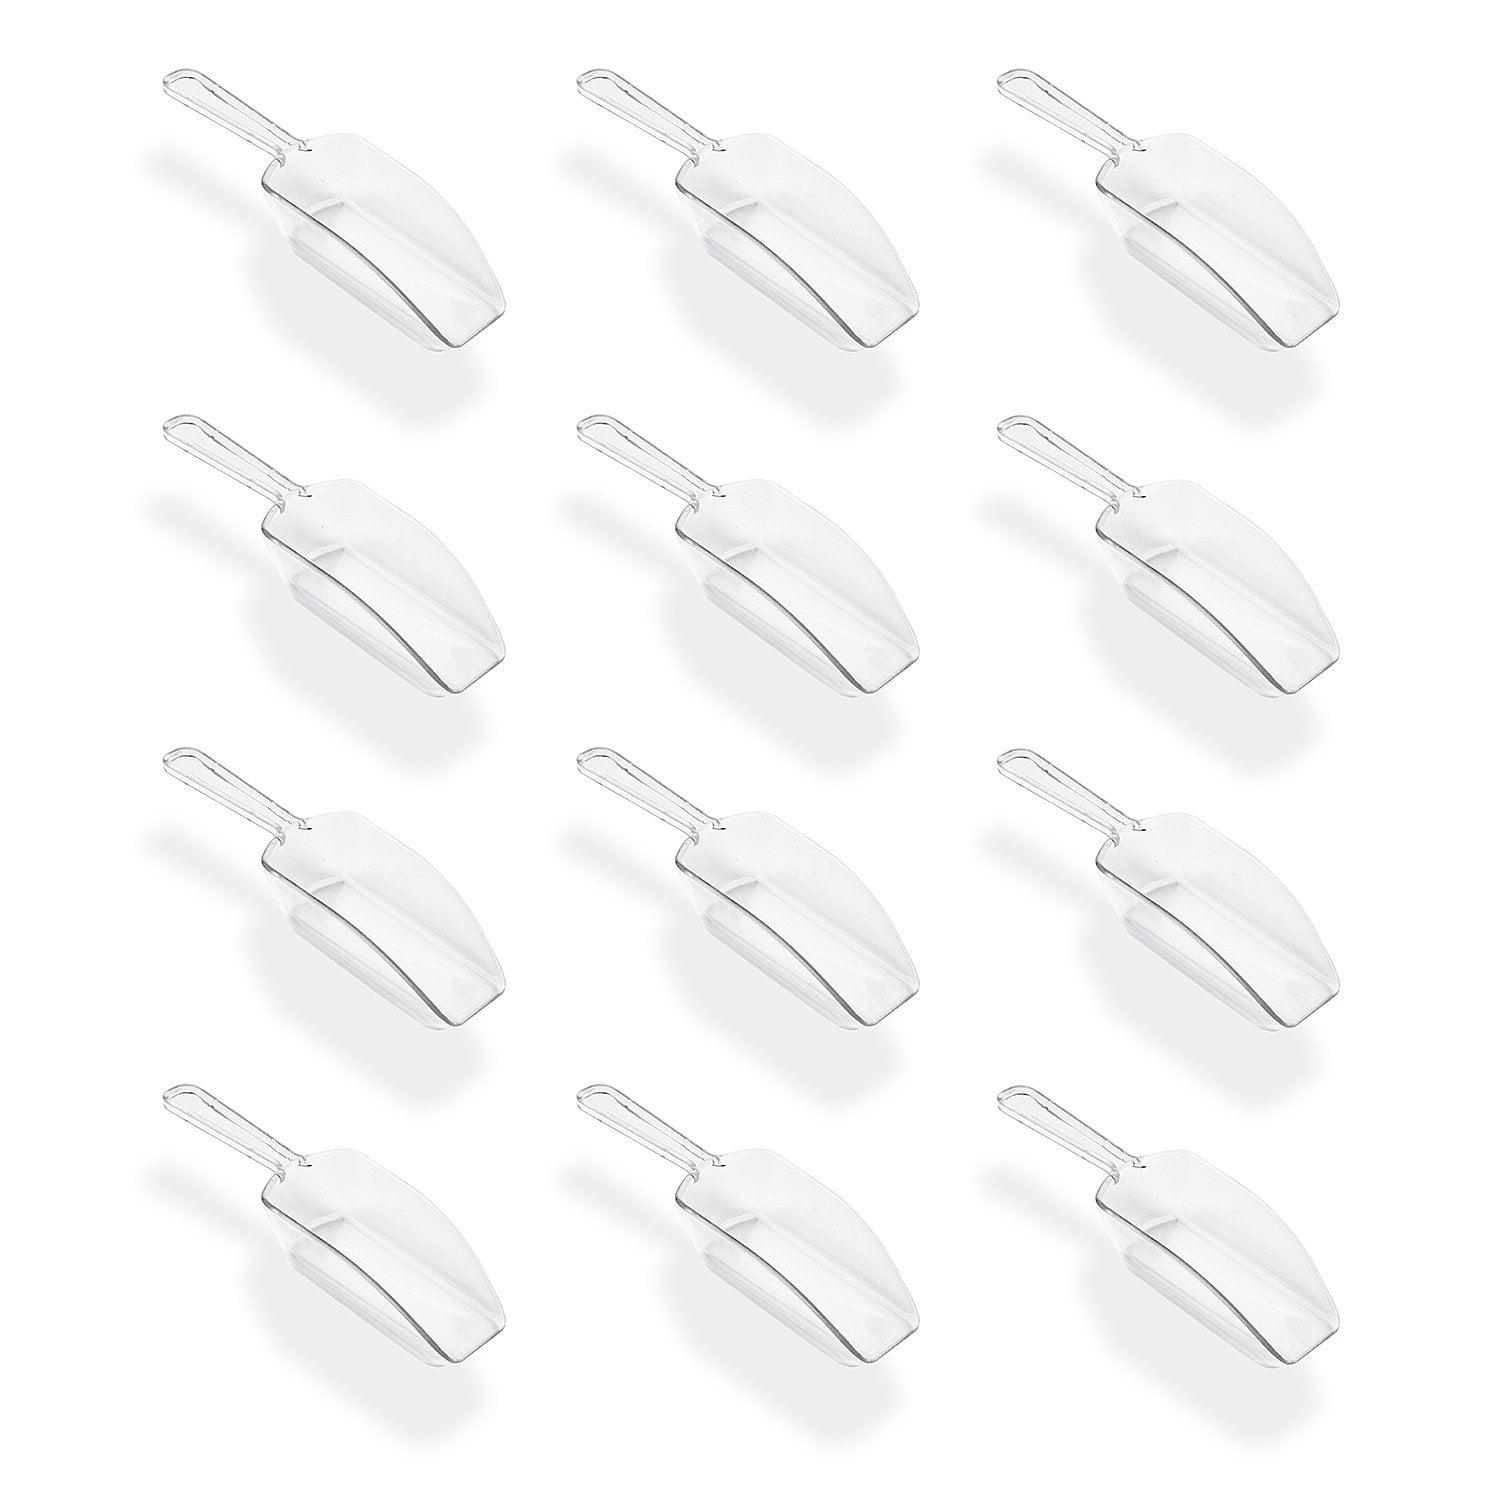 Mini Scoop Set of 8, E-far 3 Ounce Stainless Steel Scoops for Ice  Cube/Candy/Flour/Sugar, Metal Utility Scoops for Weddings, Dessert Buffet